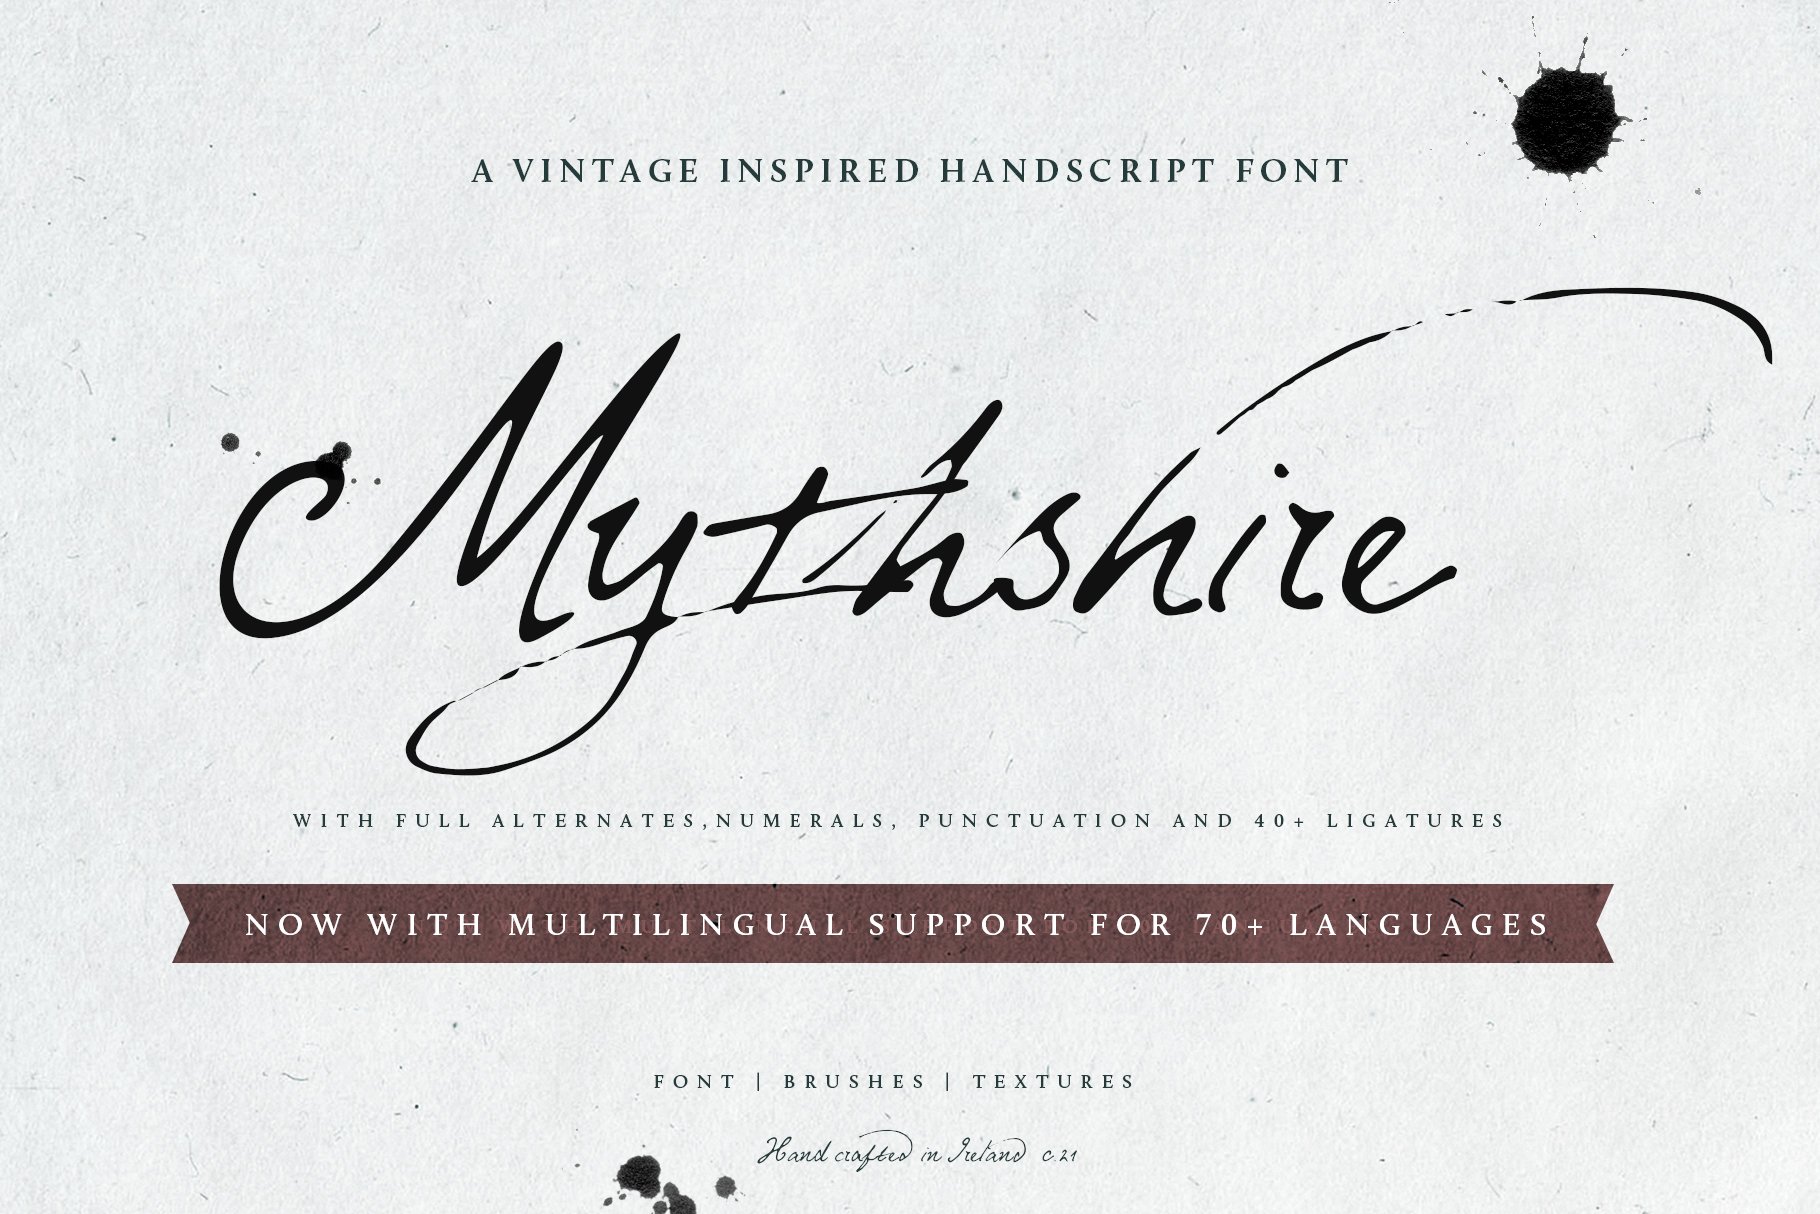 Mythshire vintage script + extras cover image.